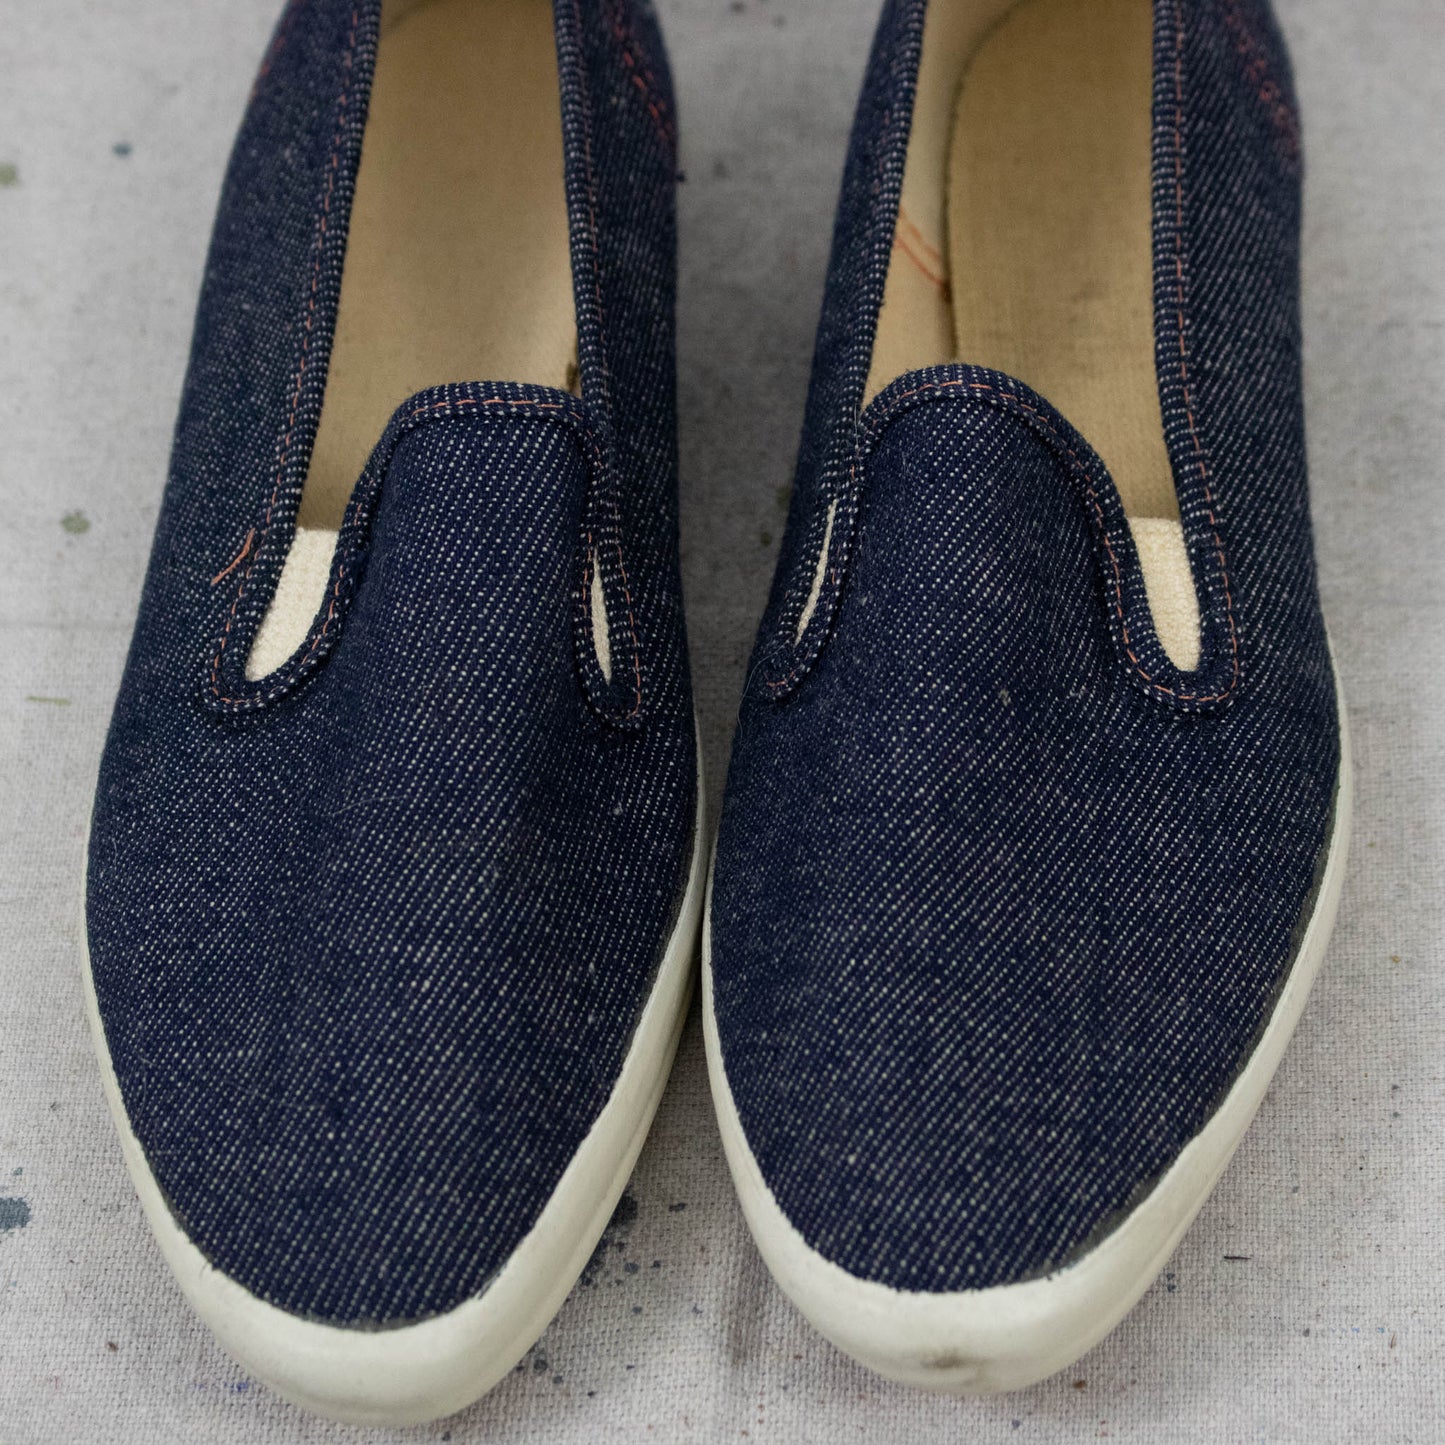 Vintage Womens 50s 5.5 6 Narrow Denim Jeepers Slip OnPointed Toe Flat Shoes